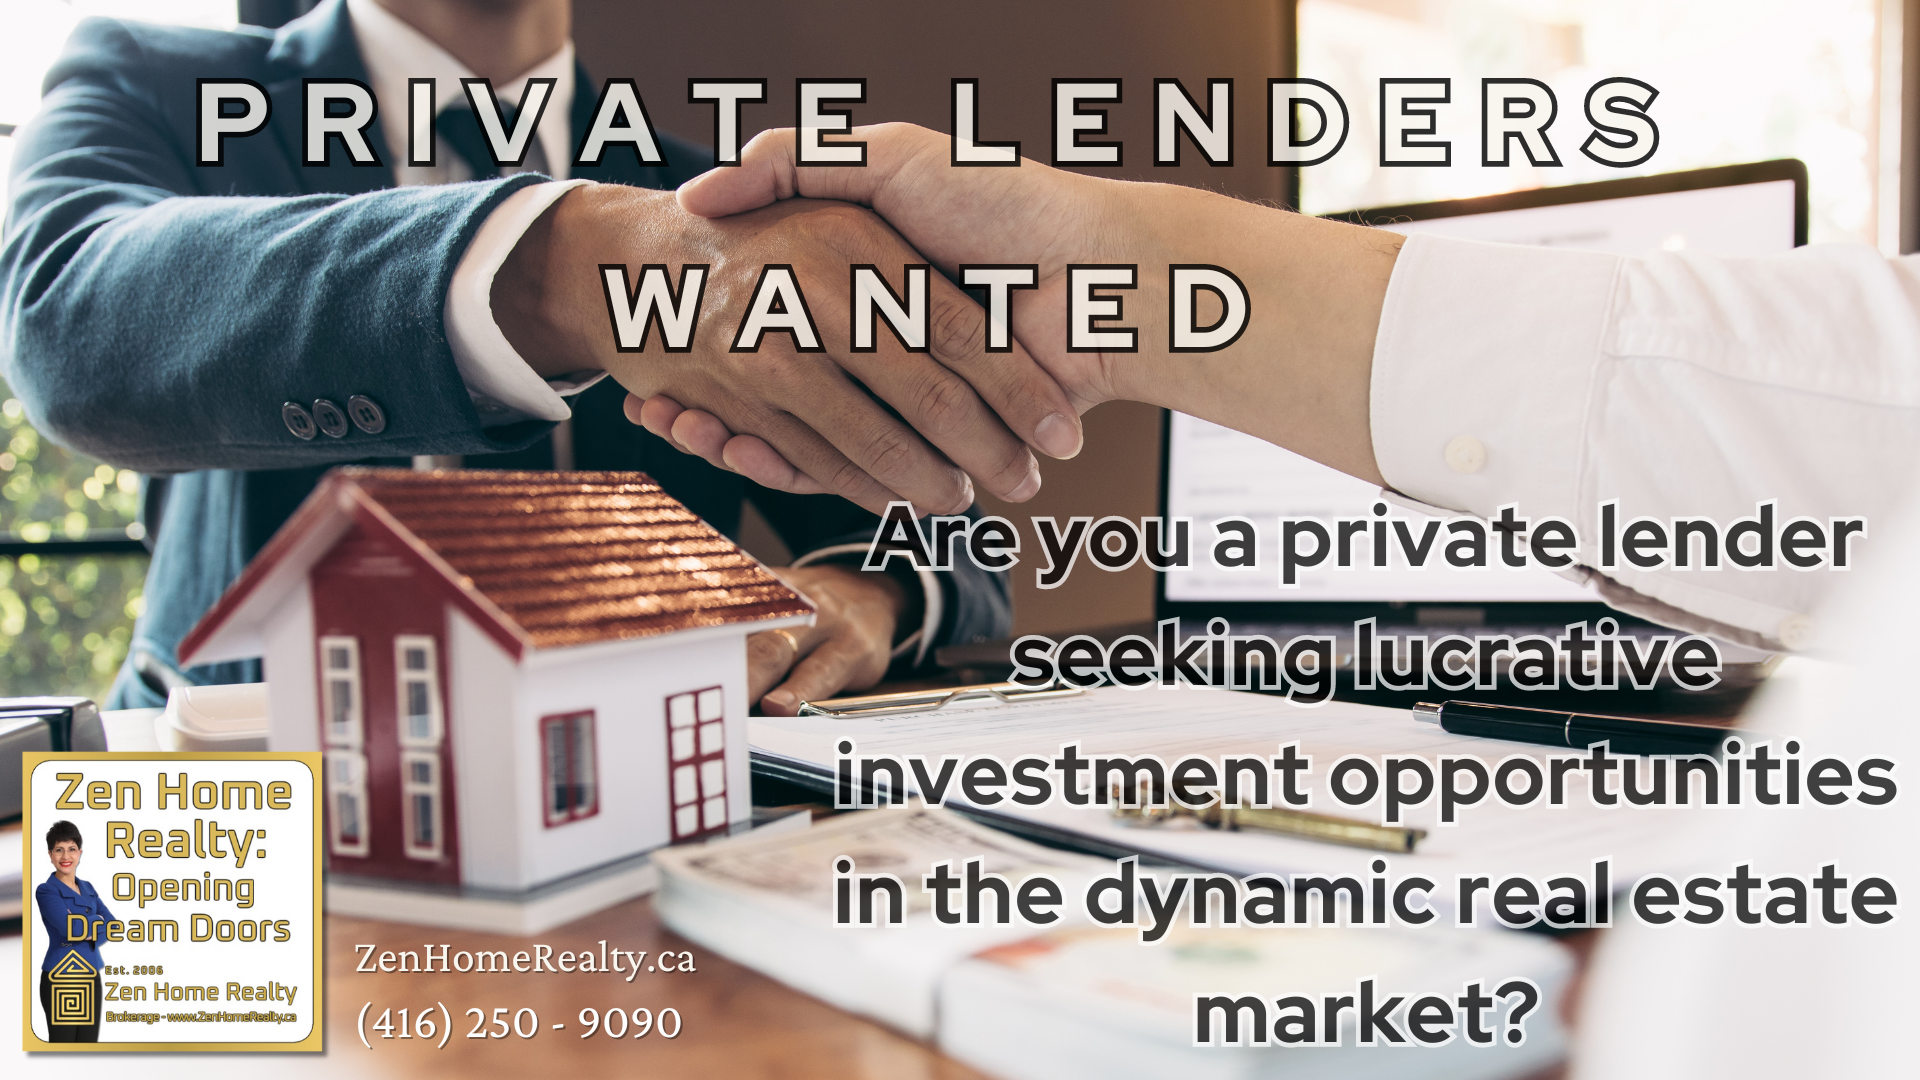 Private lender seeking promising investment opportunities dynamic real estate market zen home realty blog image